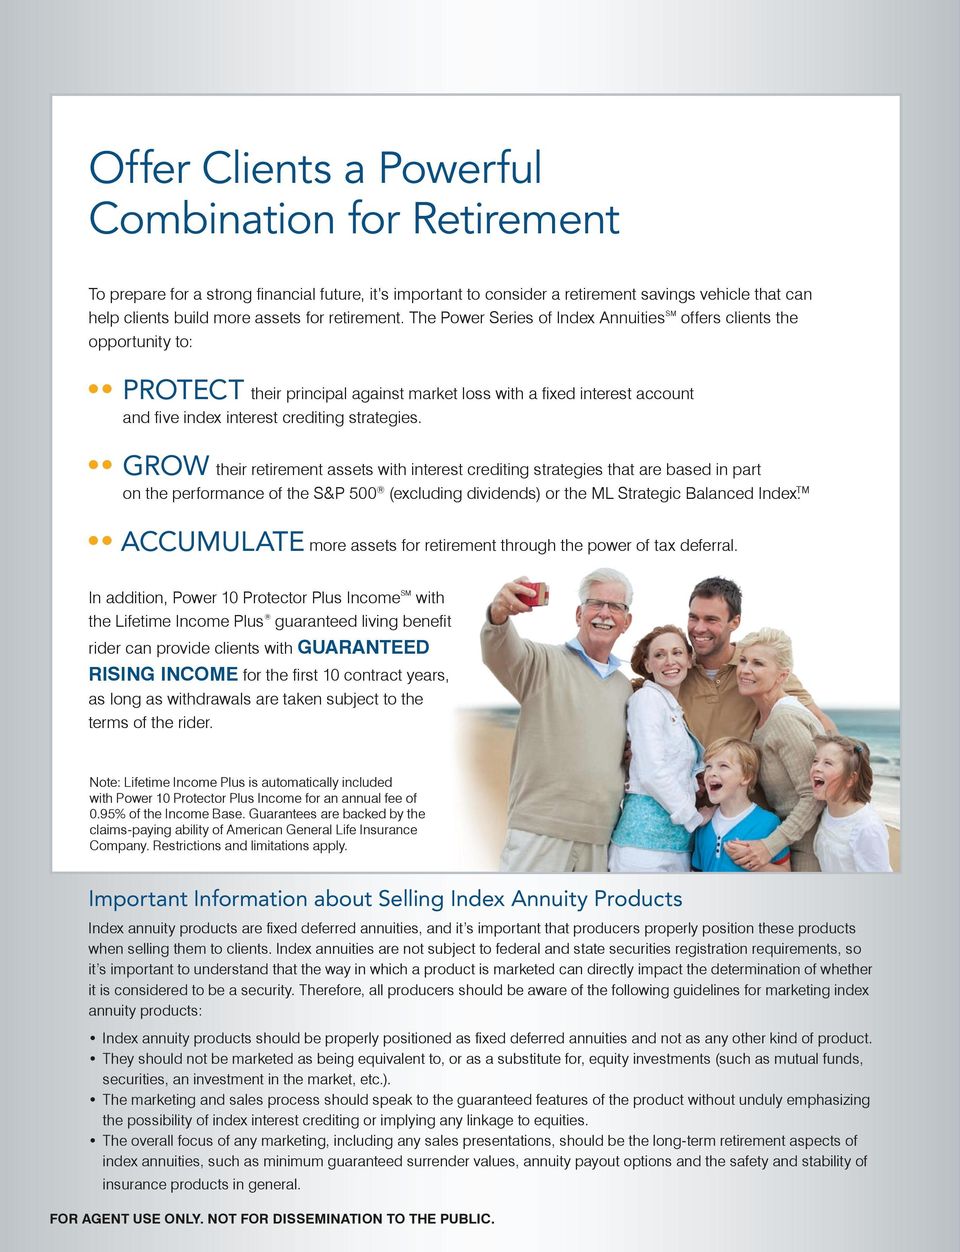 The Power Series of Index Annuities SM offers clients the opportunity to: PROTECT their principal against market loss with a fixed interest account and five index interest crediting strategies.